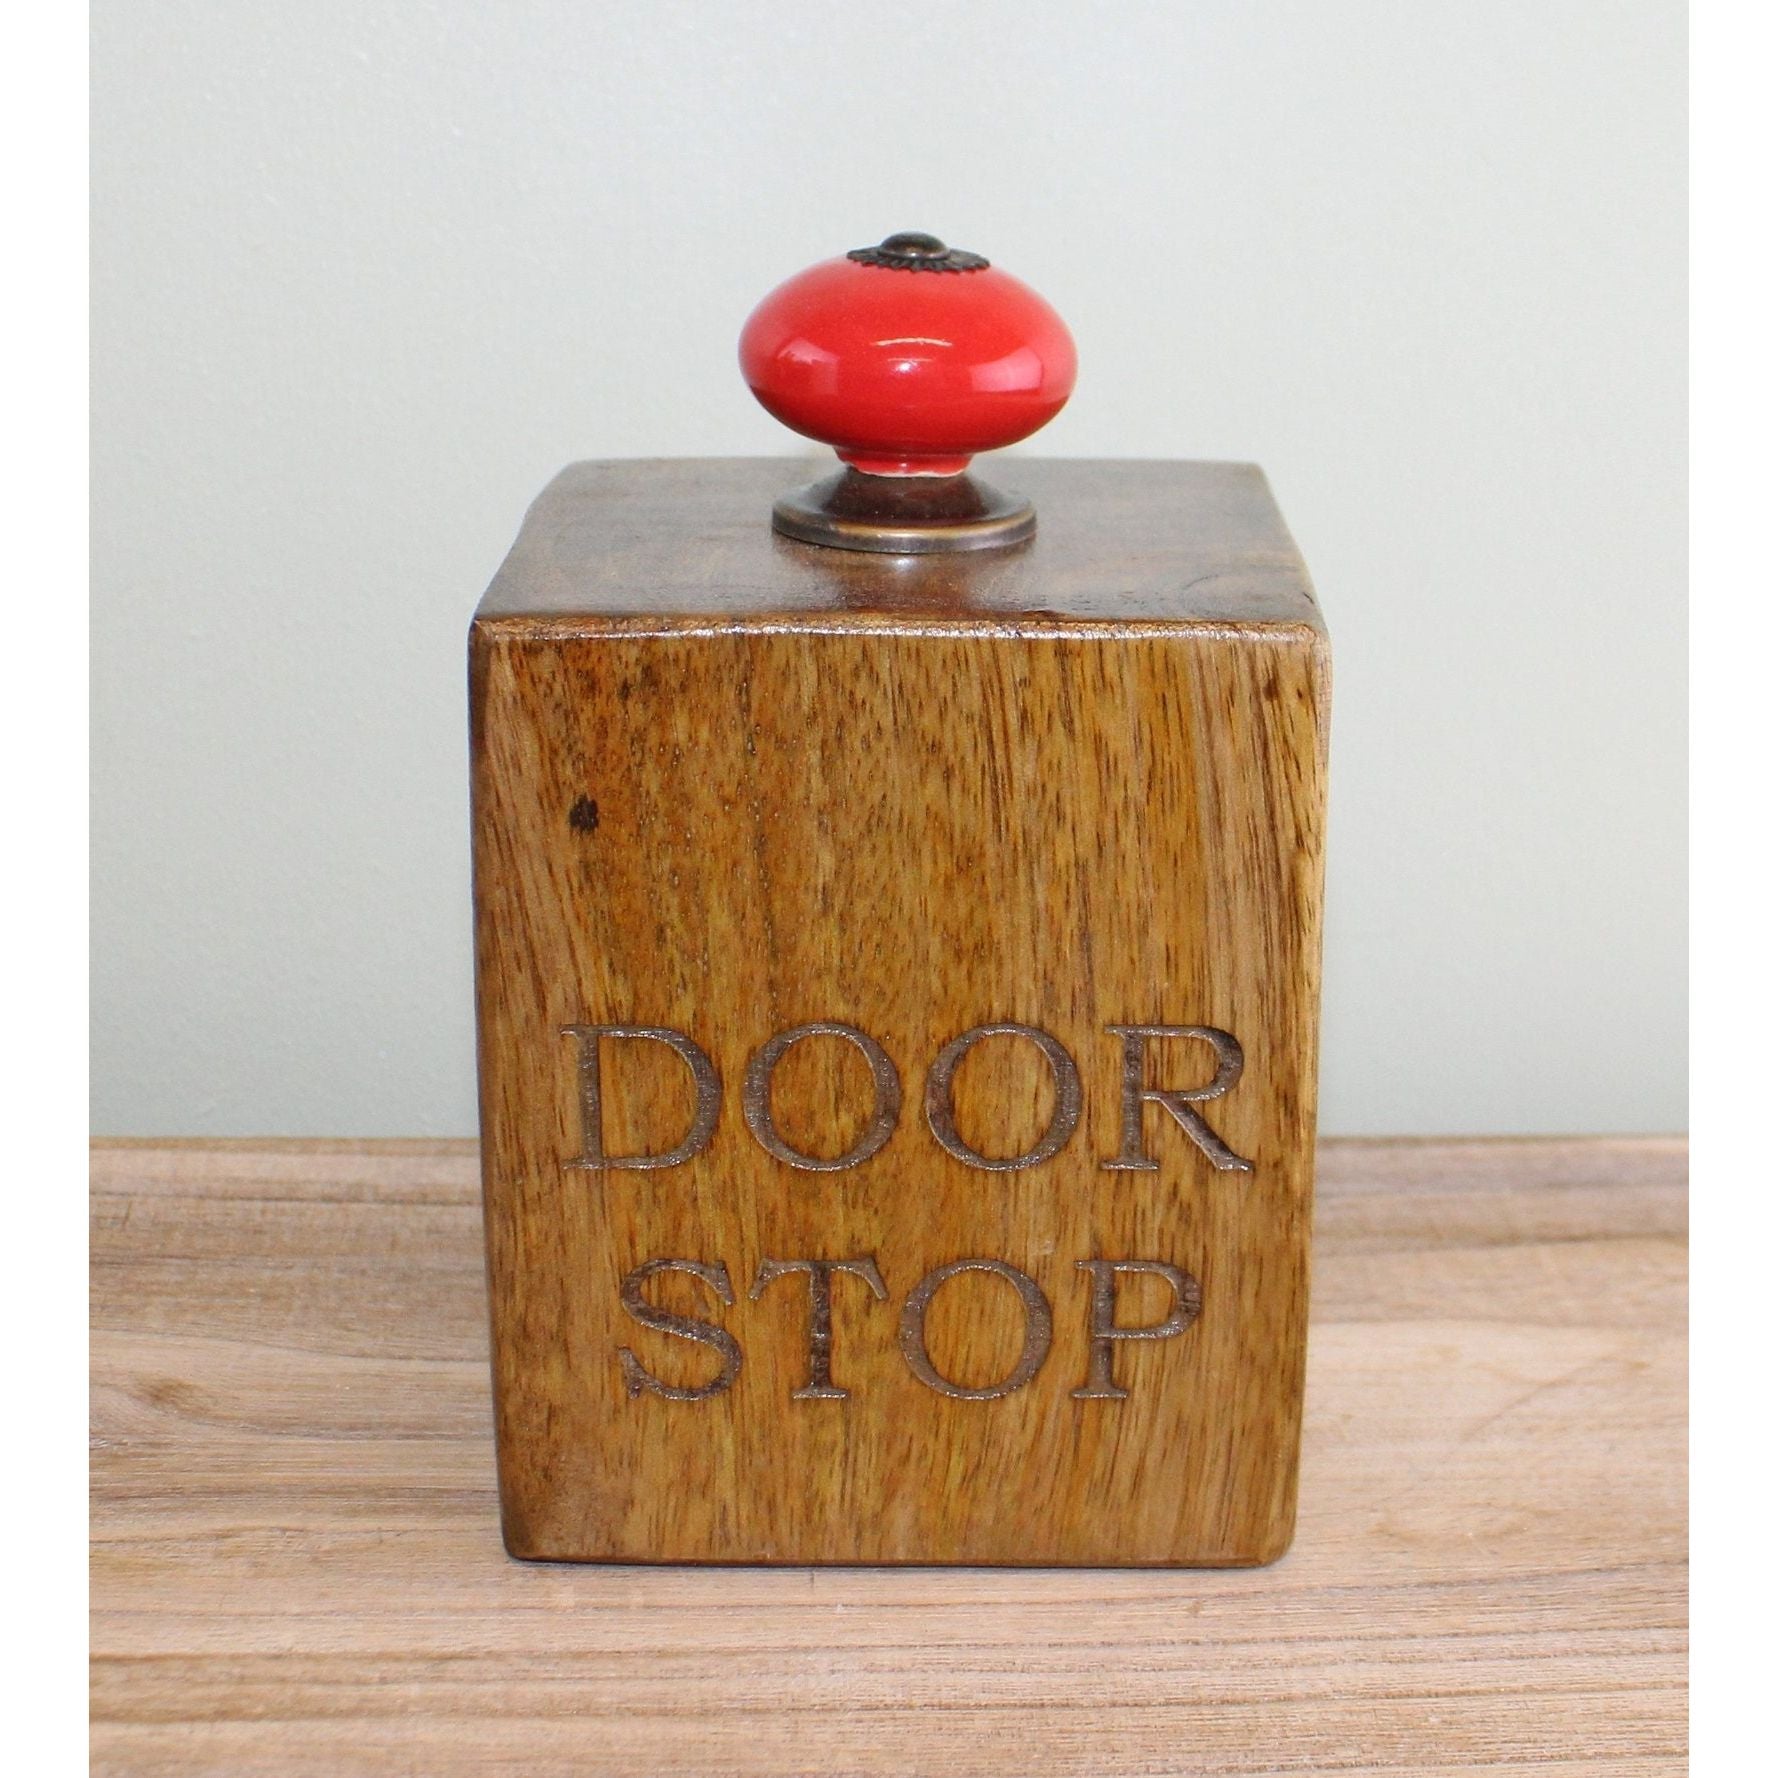 Mango Wood Doorstop With Red Ceramic Knob - Ashton and Finch